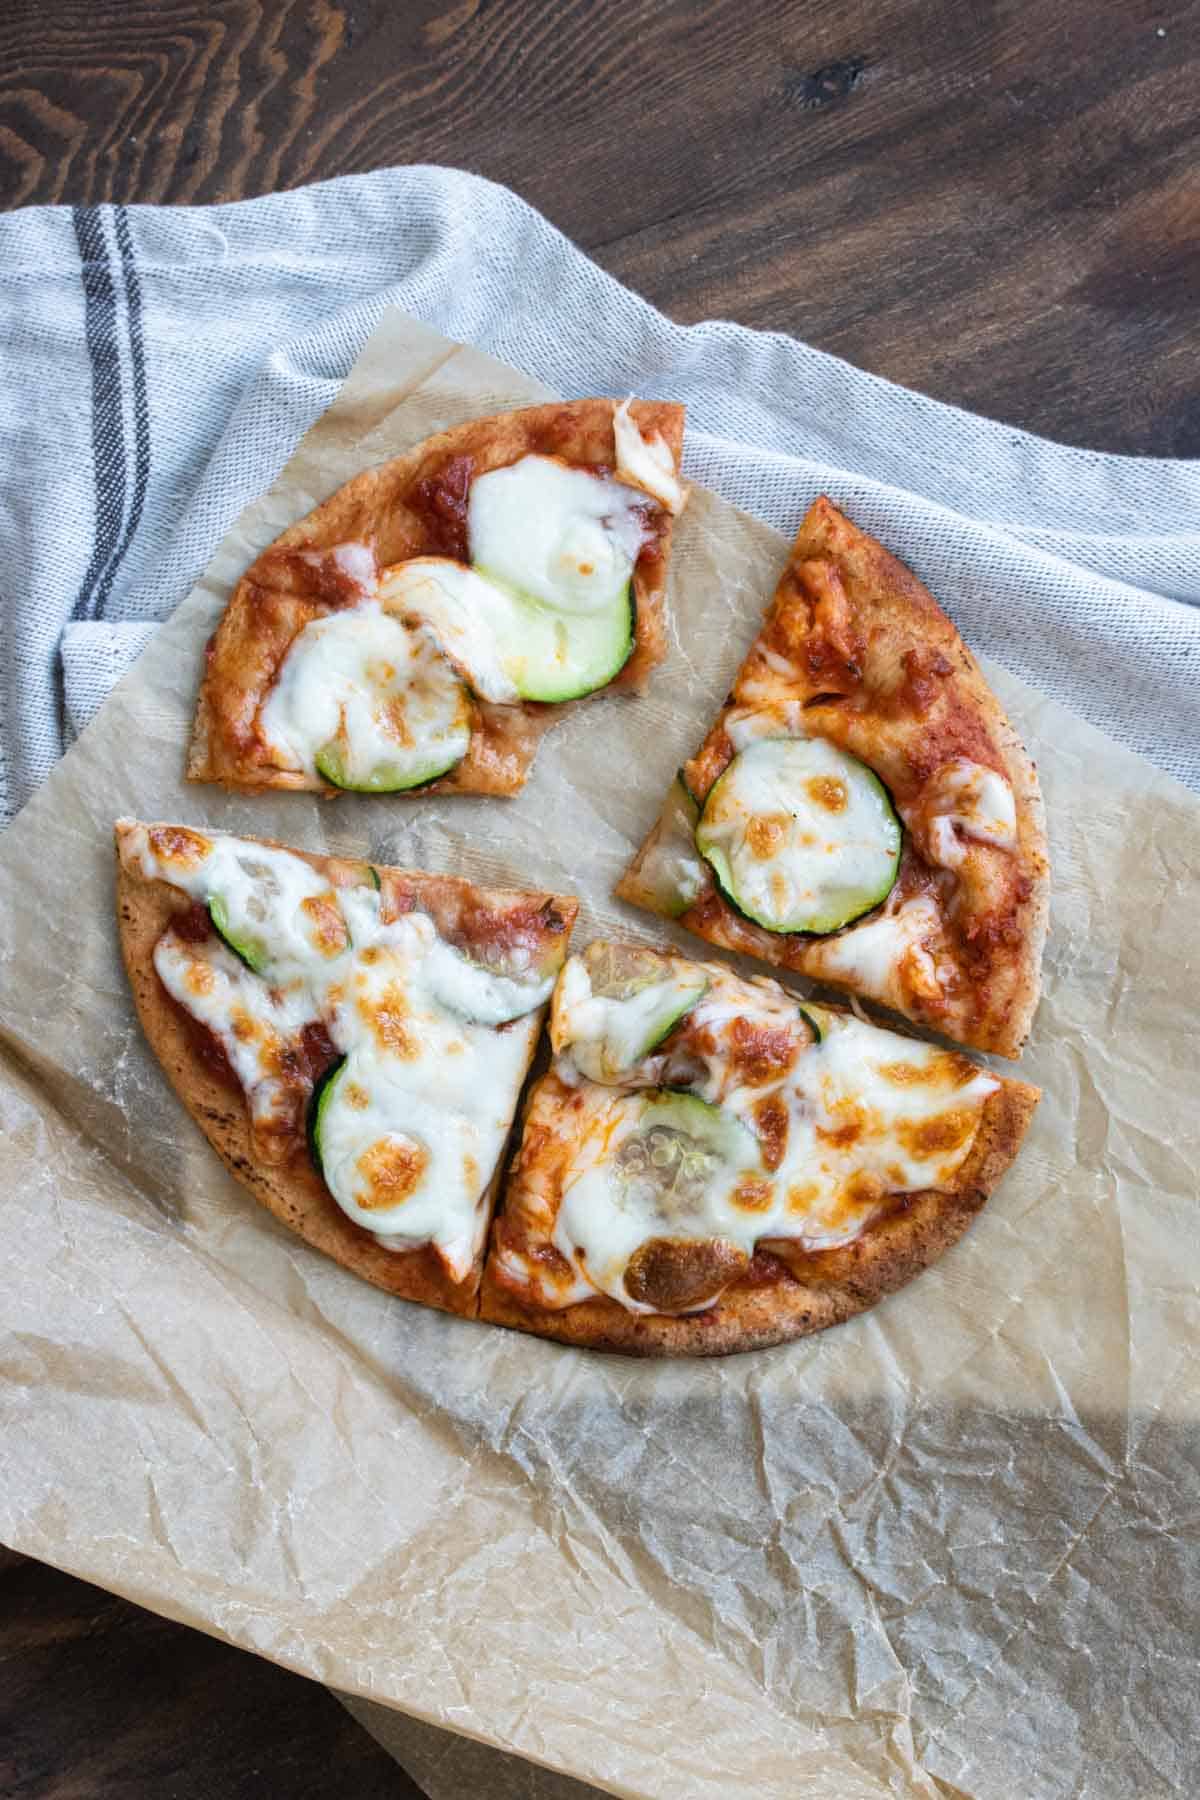 Pita bread topped with pizza sauce, zucchini slices and cheese and toasted as a pizza